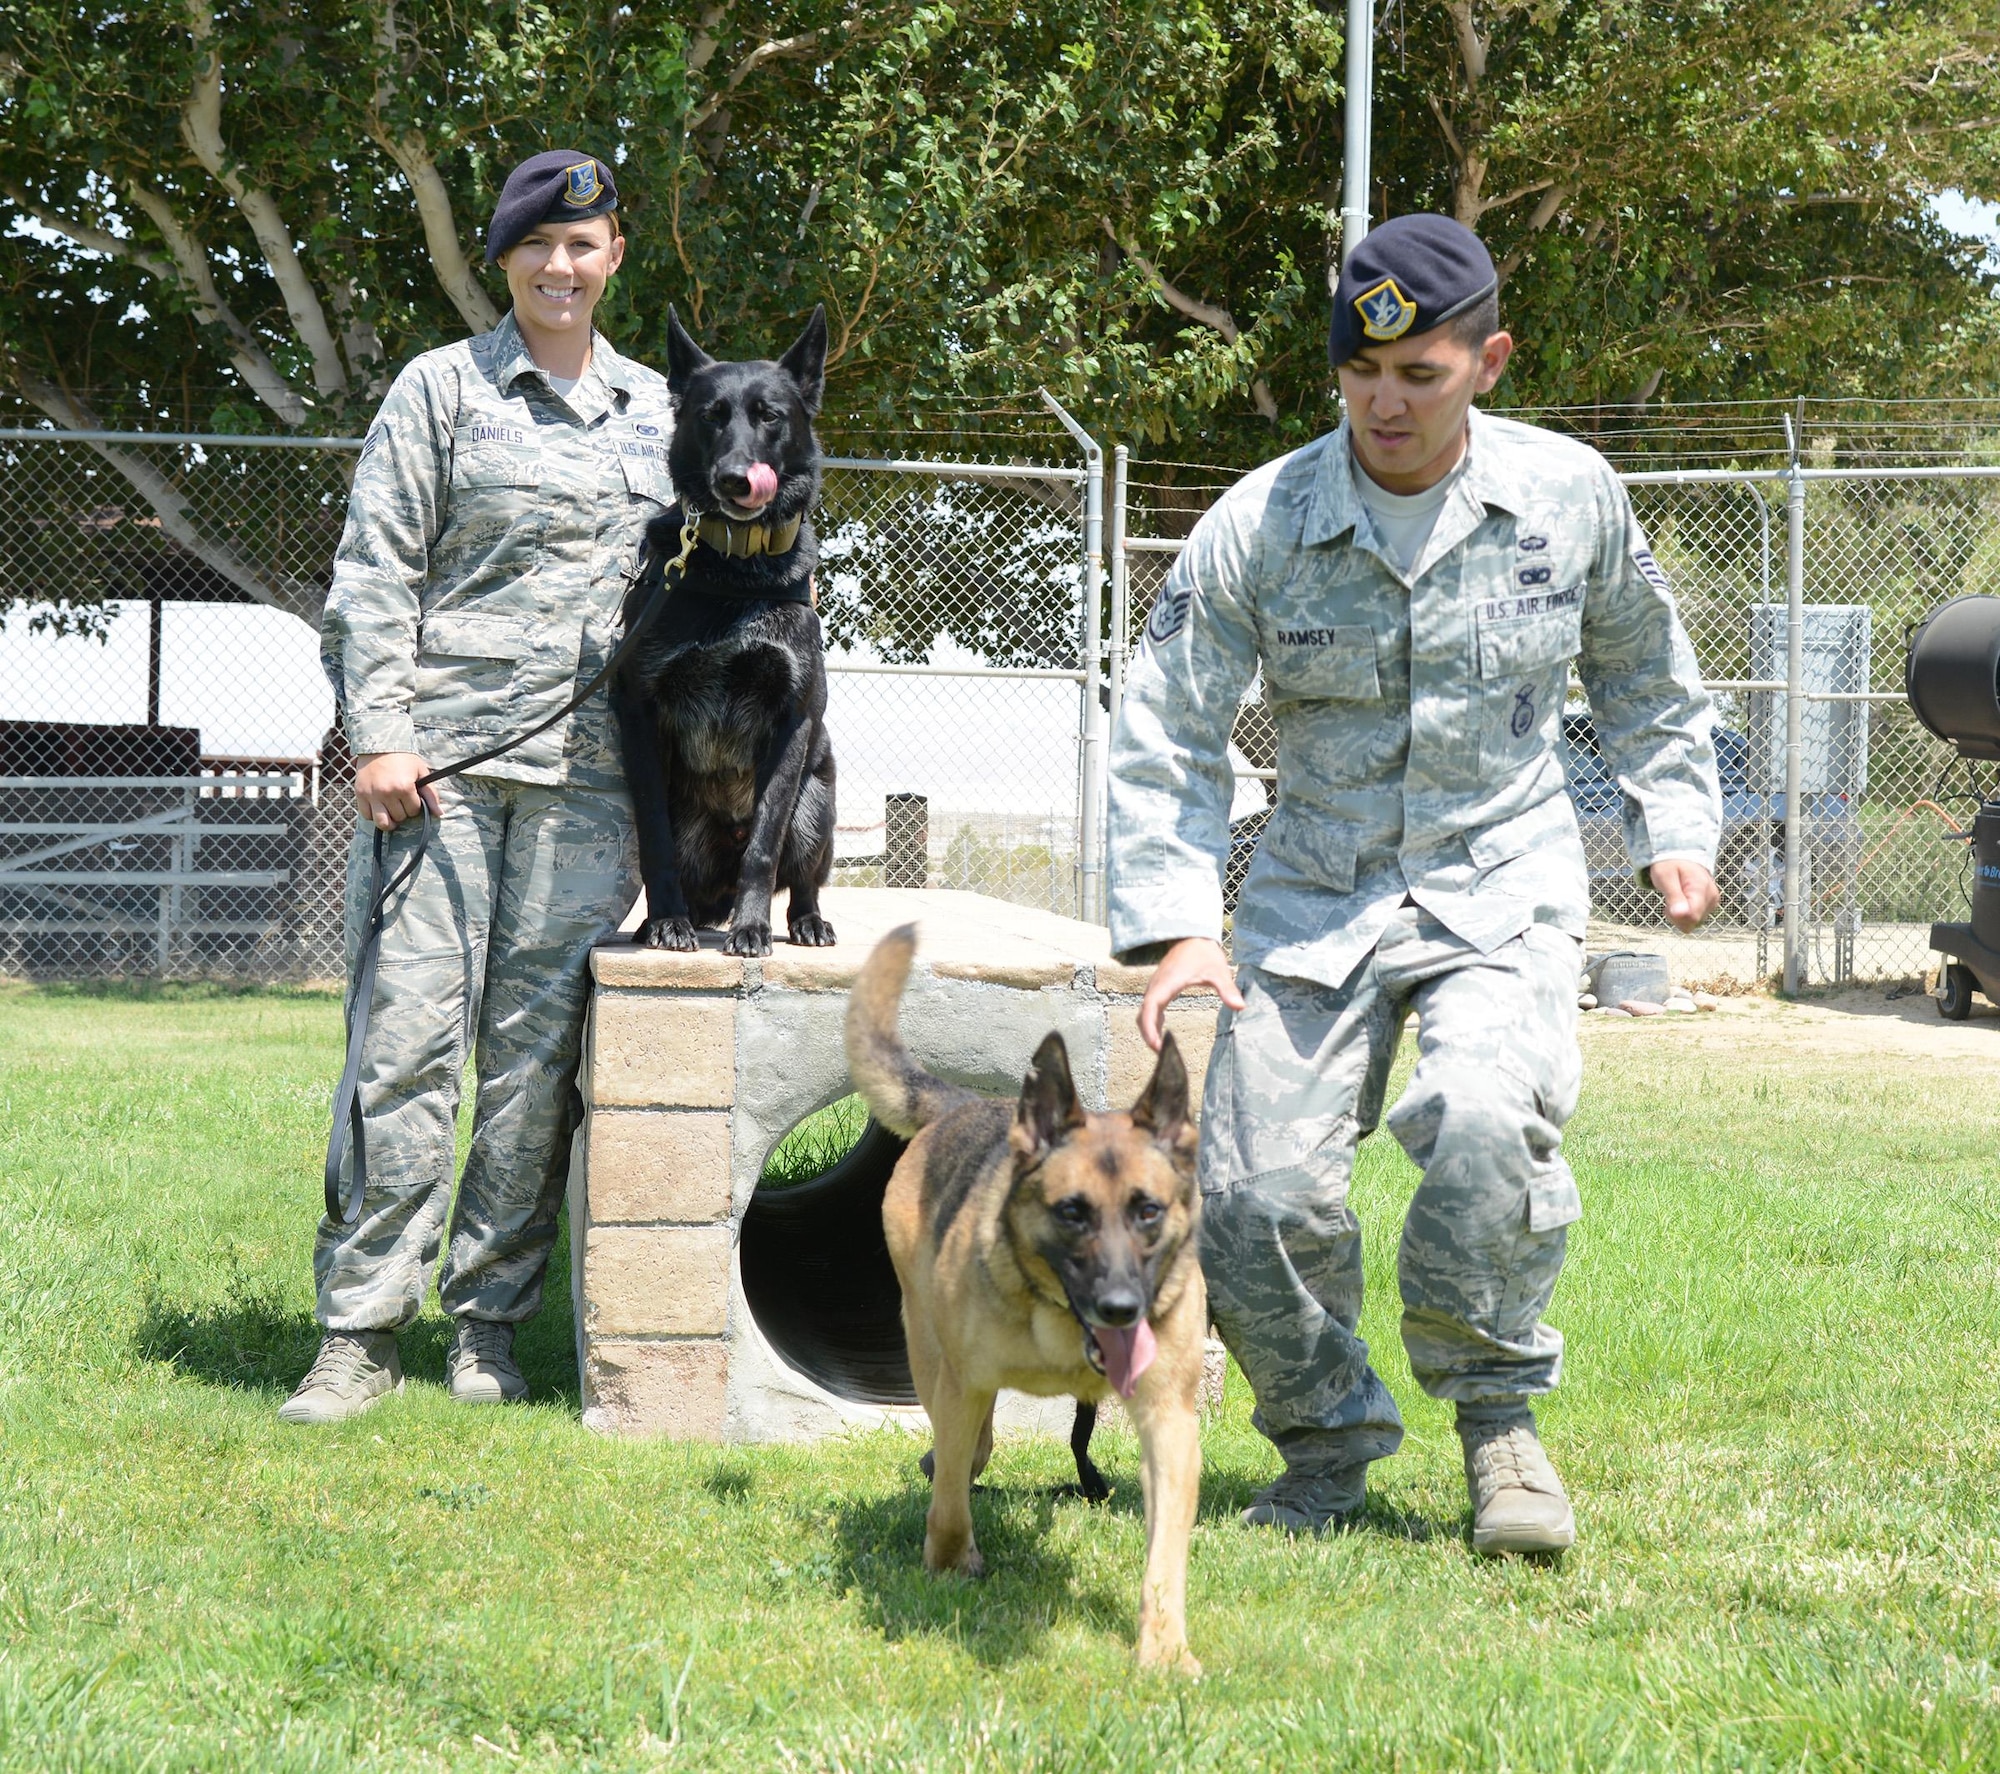 Senior Airman Grace Daniels and her partner Rolf watch as Staff Sgt. James Ramsey and Sasa run through the obstacle course at the 412th Security Forces Squadron’s Military Working Dog facility here. Both 412th SFS K-9 teams were detailed to support the U.S. Secret Service for the Democratic and Republican National Conventions in Cleveland and Philadelphia. (U.S. Air Force photo by Christopher Ball)